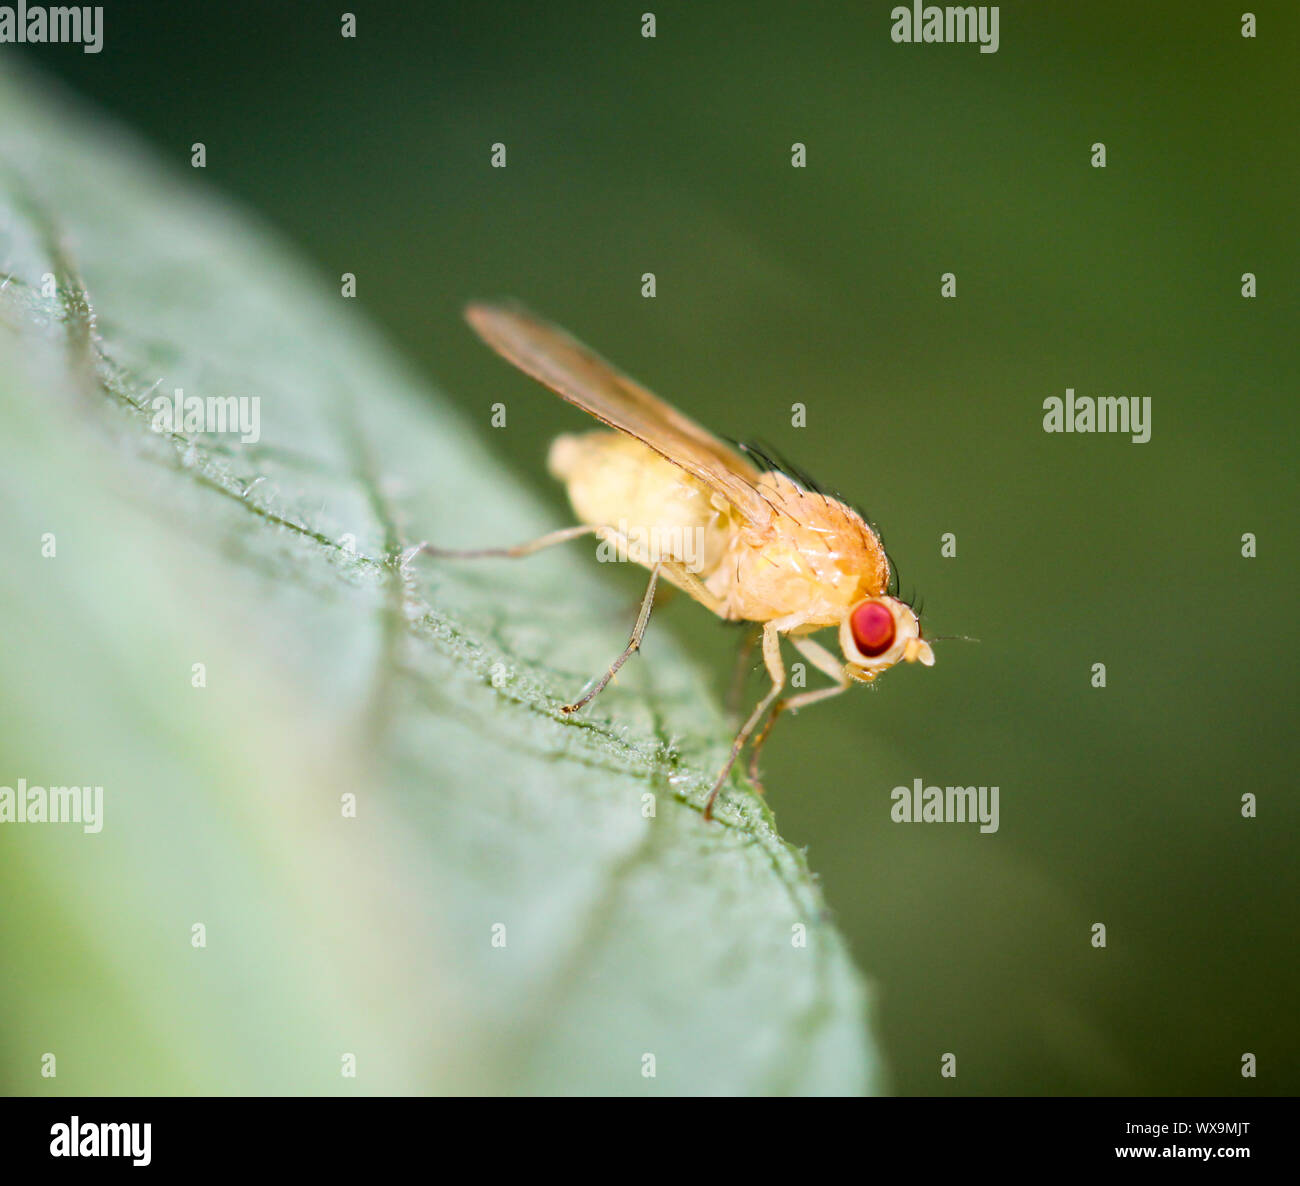 this is a fly on a plant Stock Photo